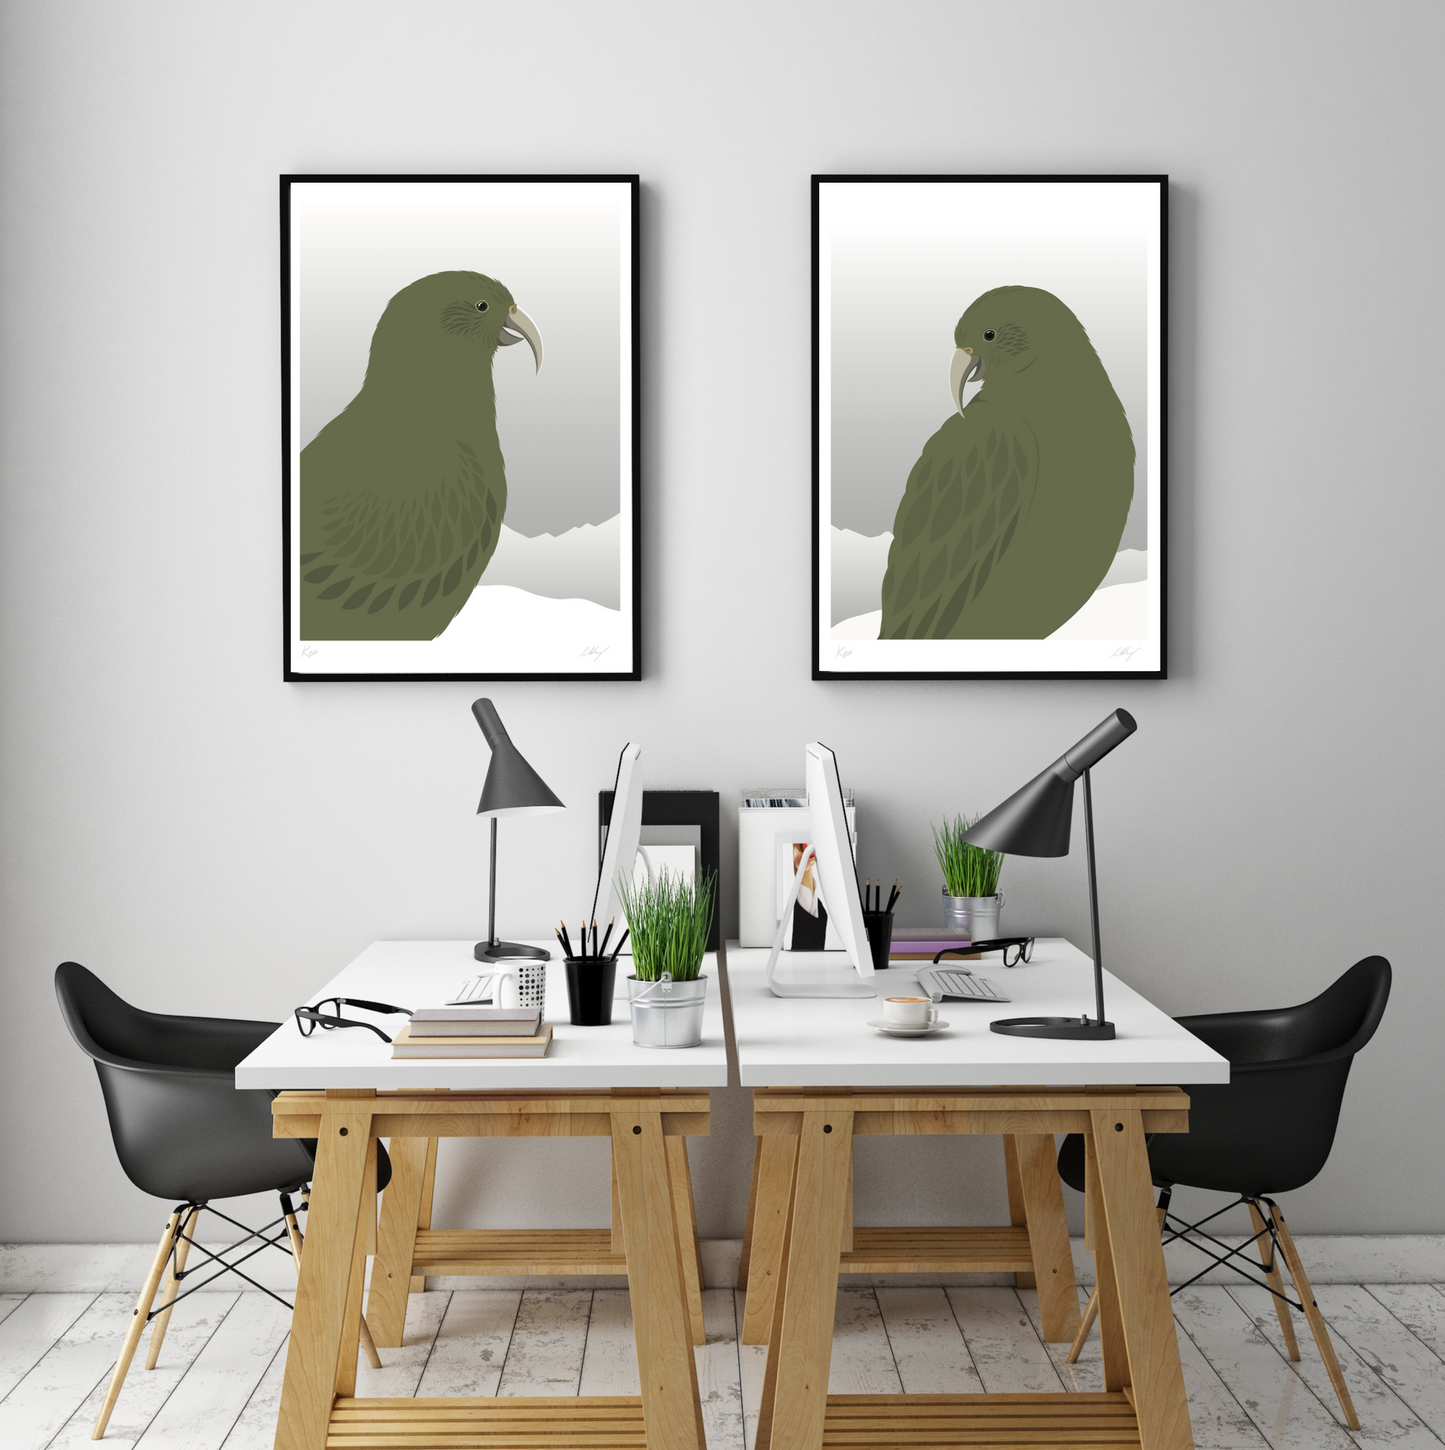 Framed prints of the Kea bird of New Zealand, by Hansby Design